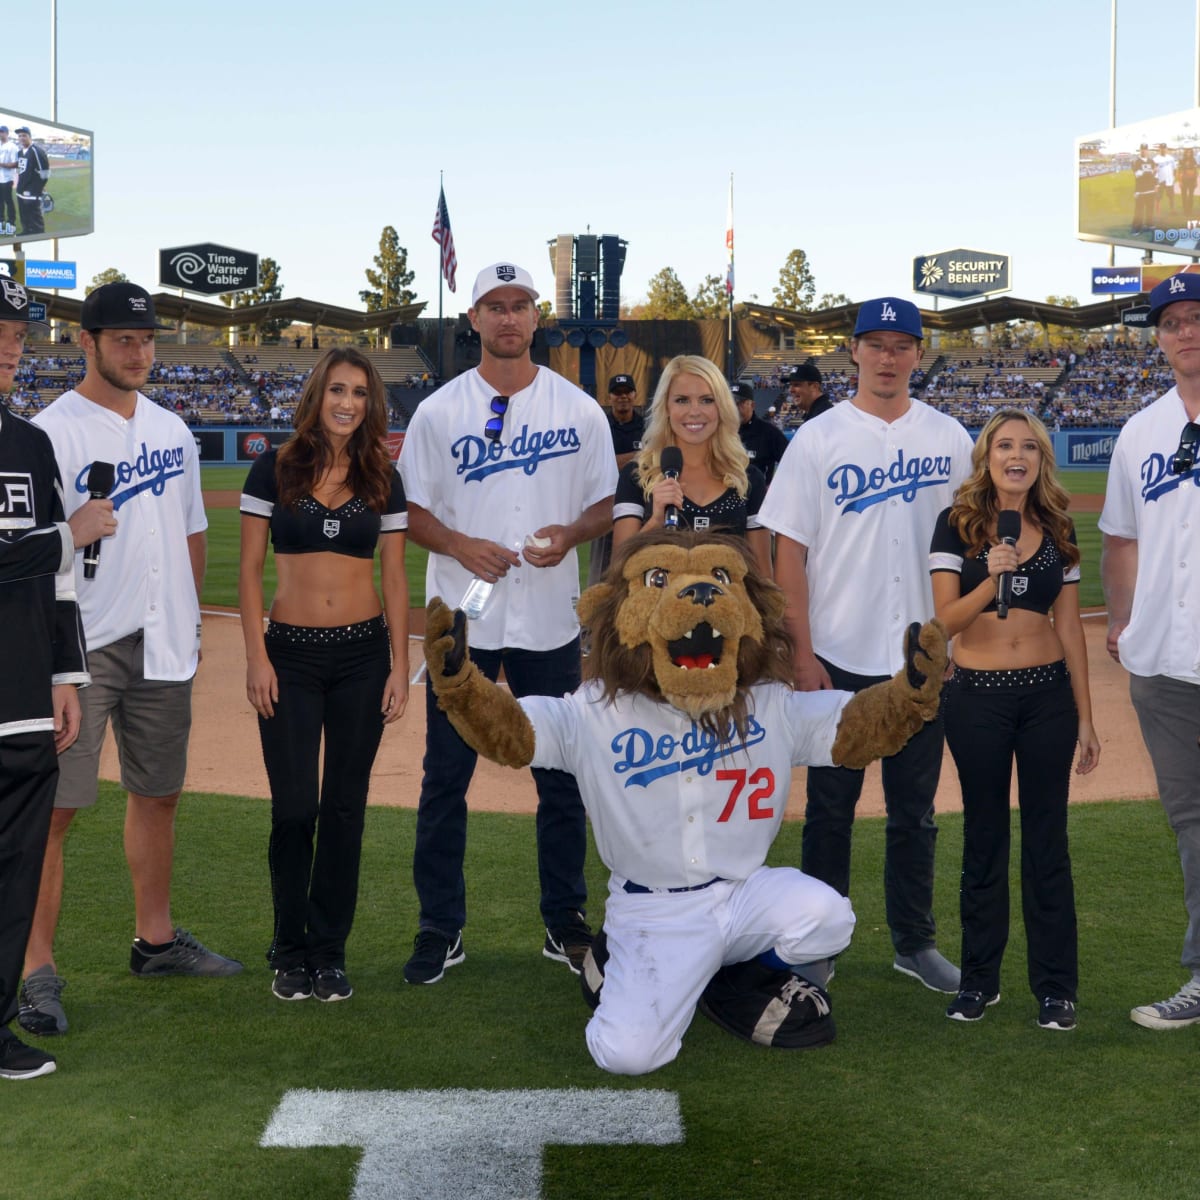 Join us for Dodgers night at the kings game on January 14th! Click